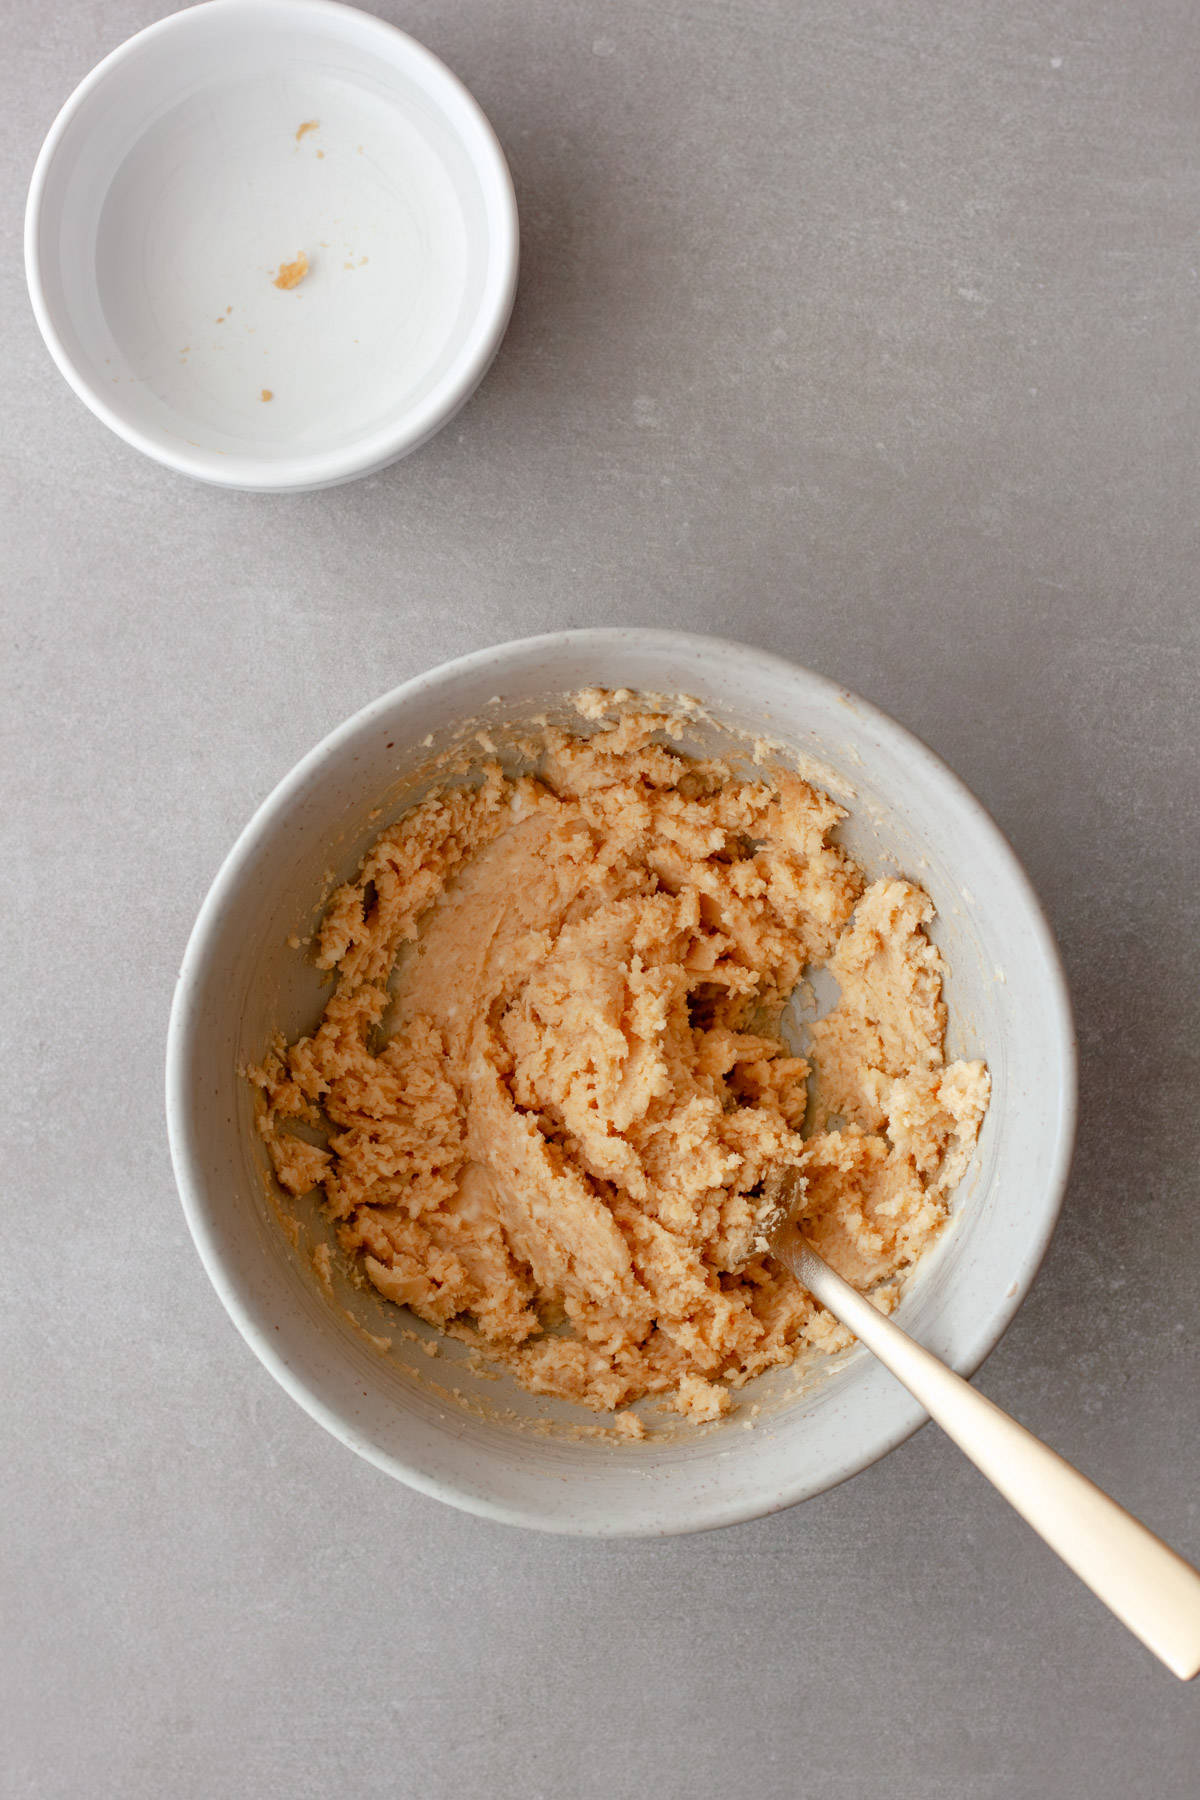 Miso butter combined in a gray bowl for a fork.